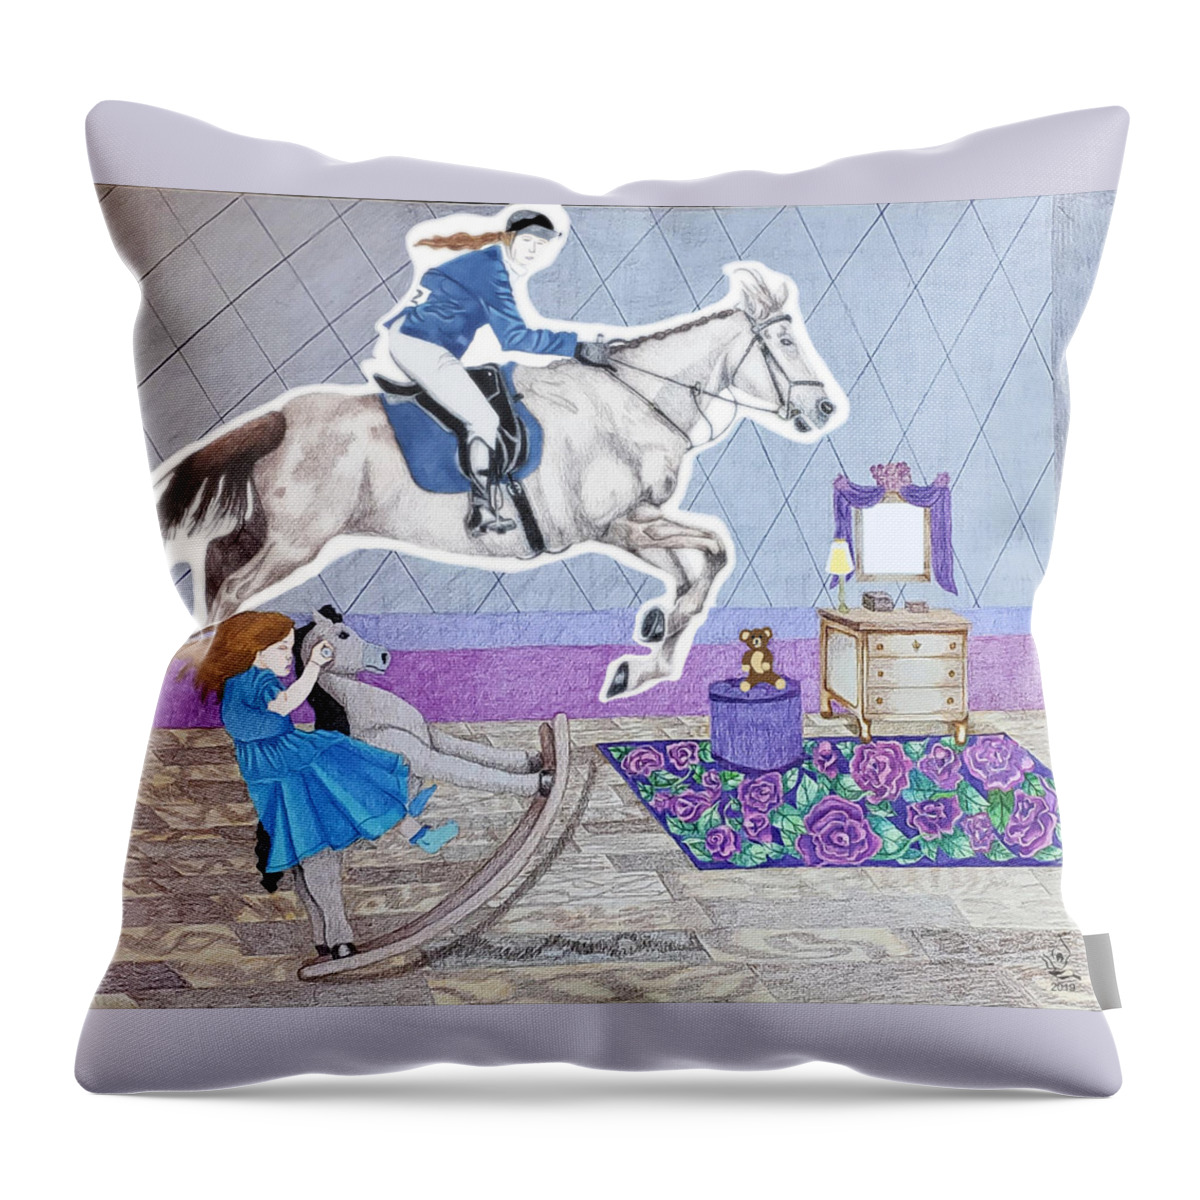 Equestrian Throw Pillow featuring the drawing The Rocking Horse by Equus Artisan